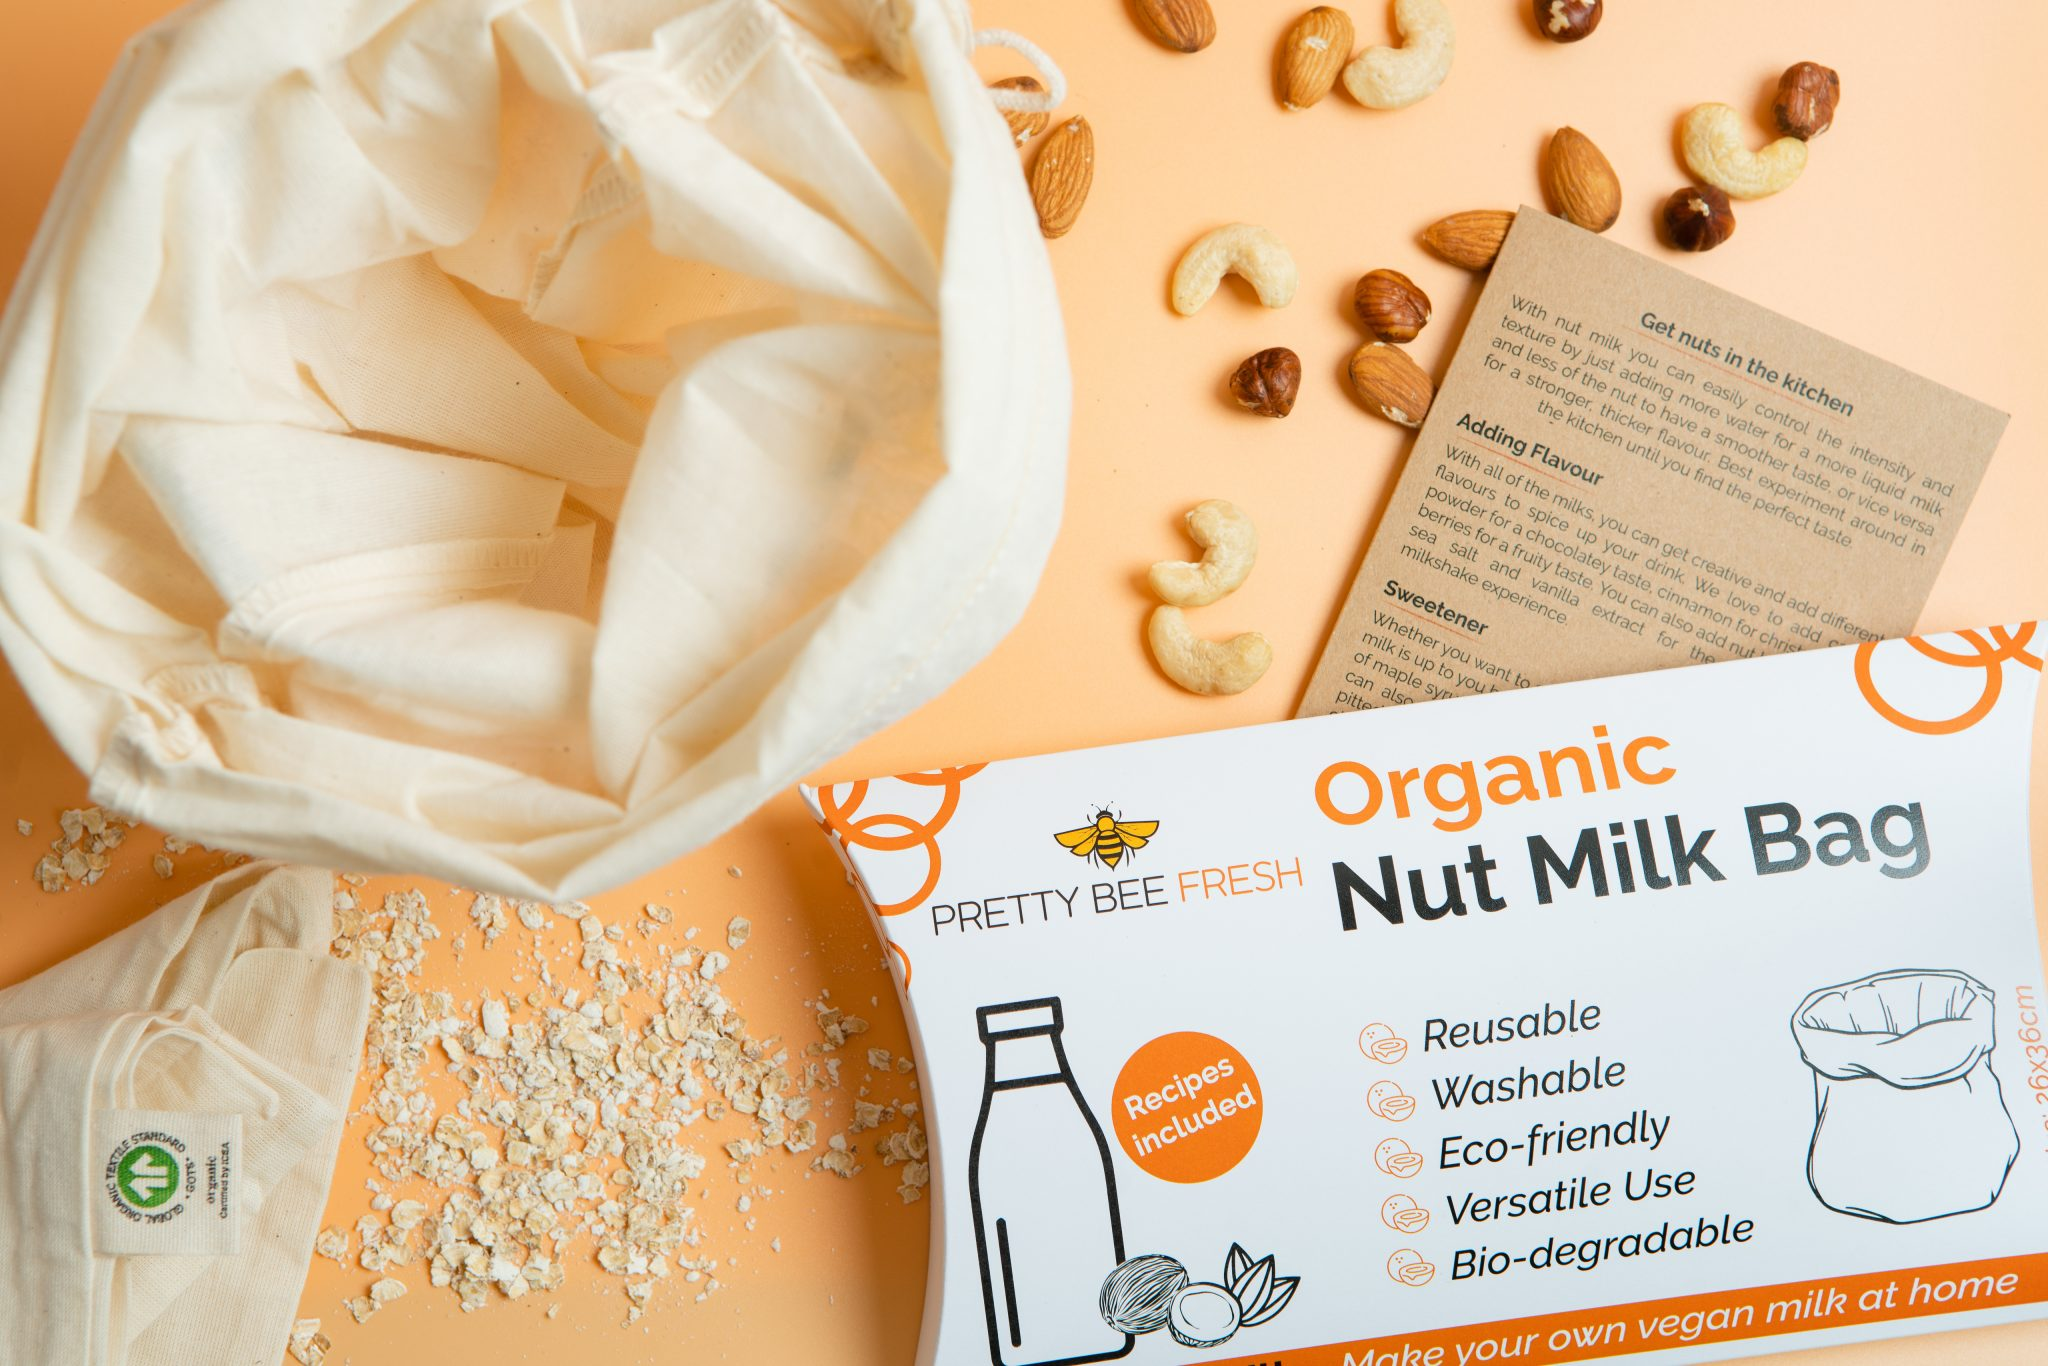 Commercial photo of an organic nut milk bag